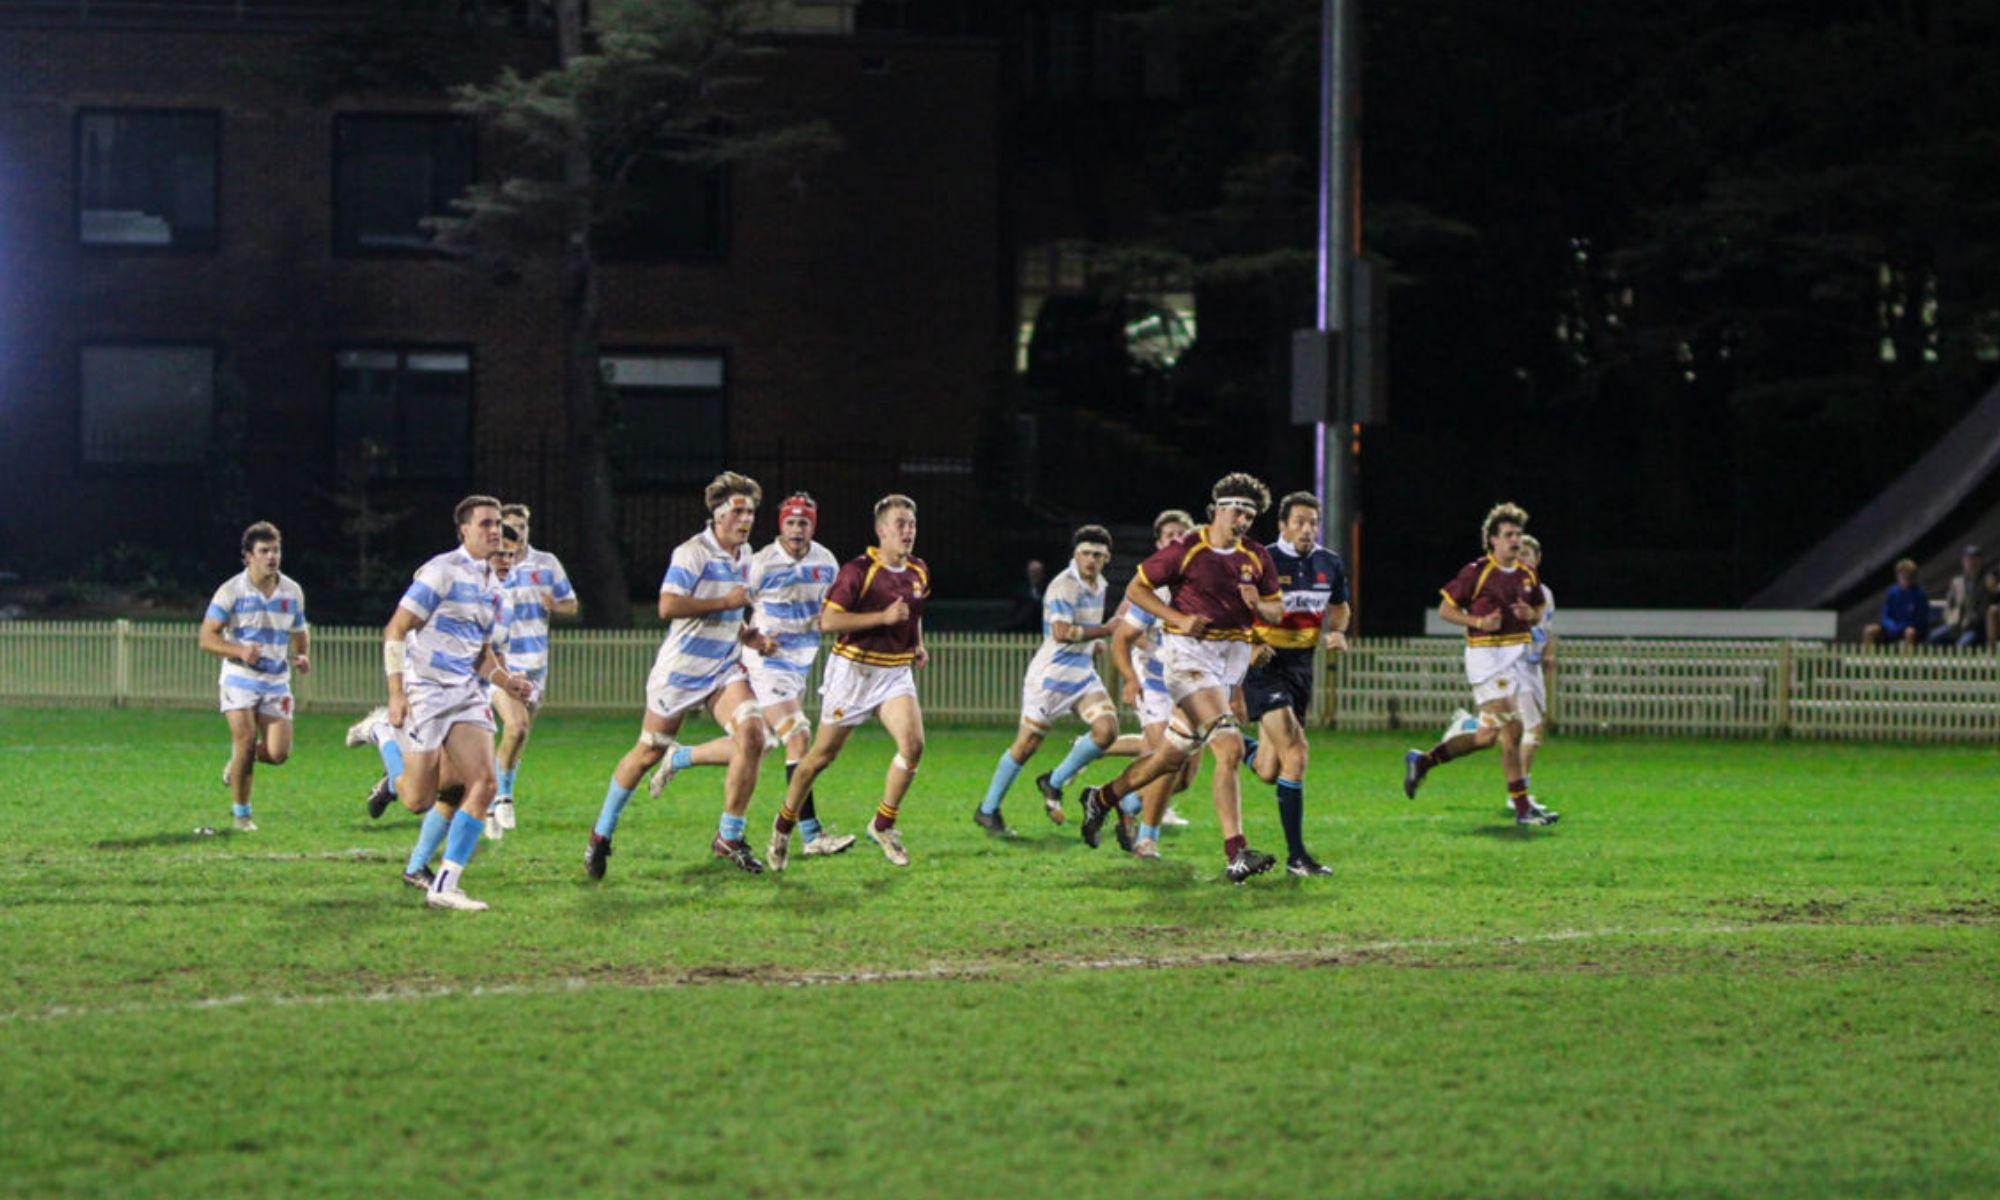 St Andrews's College - Rugby Game Oval